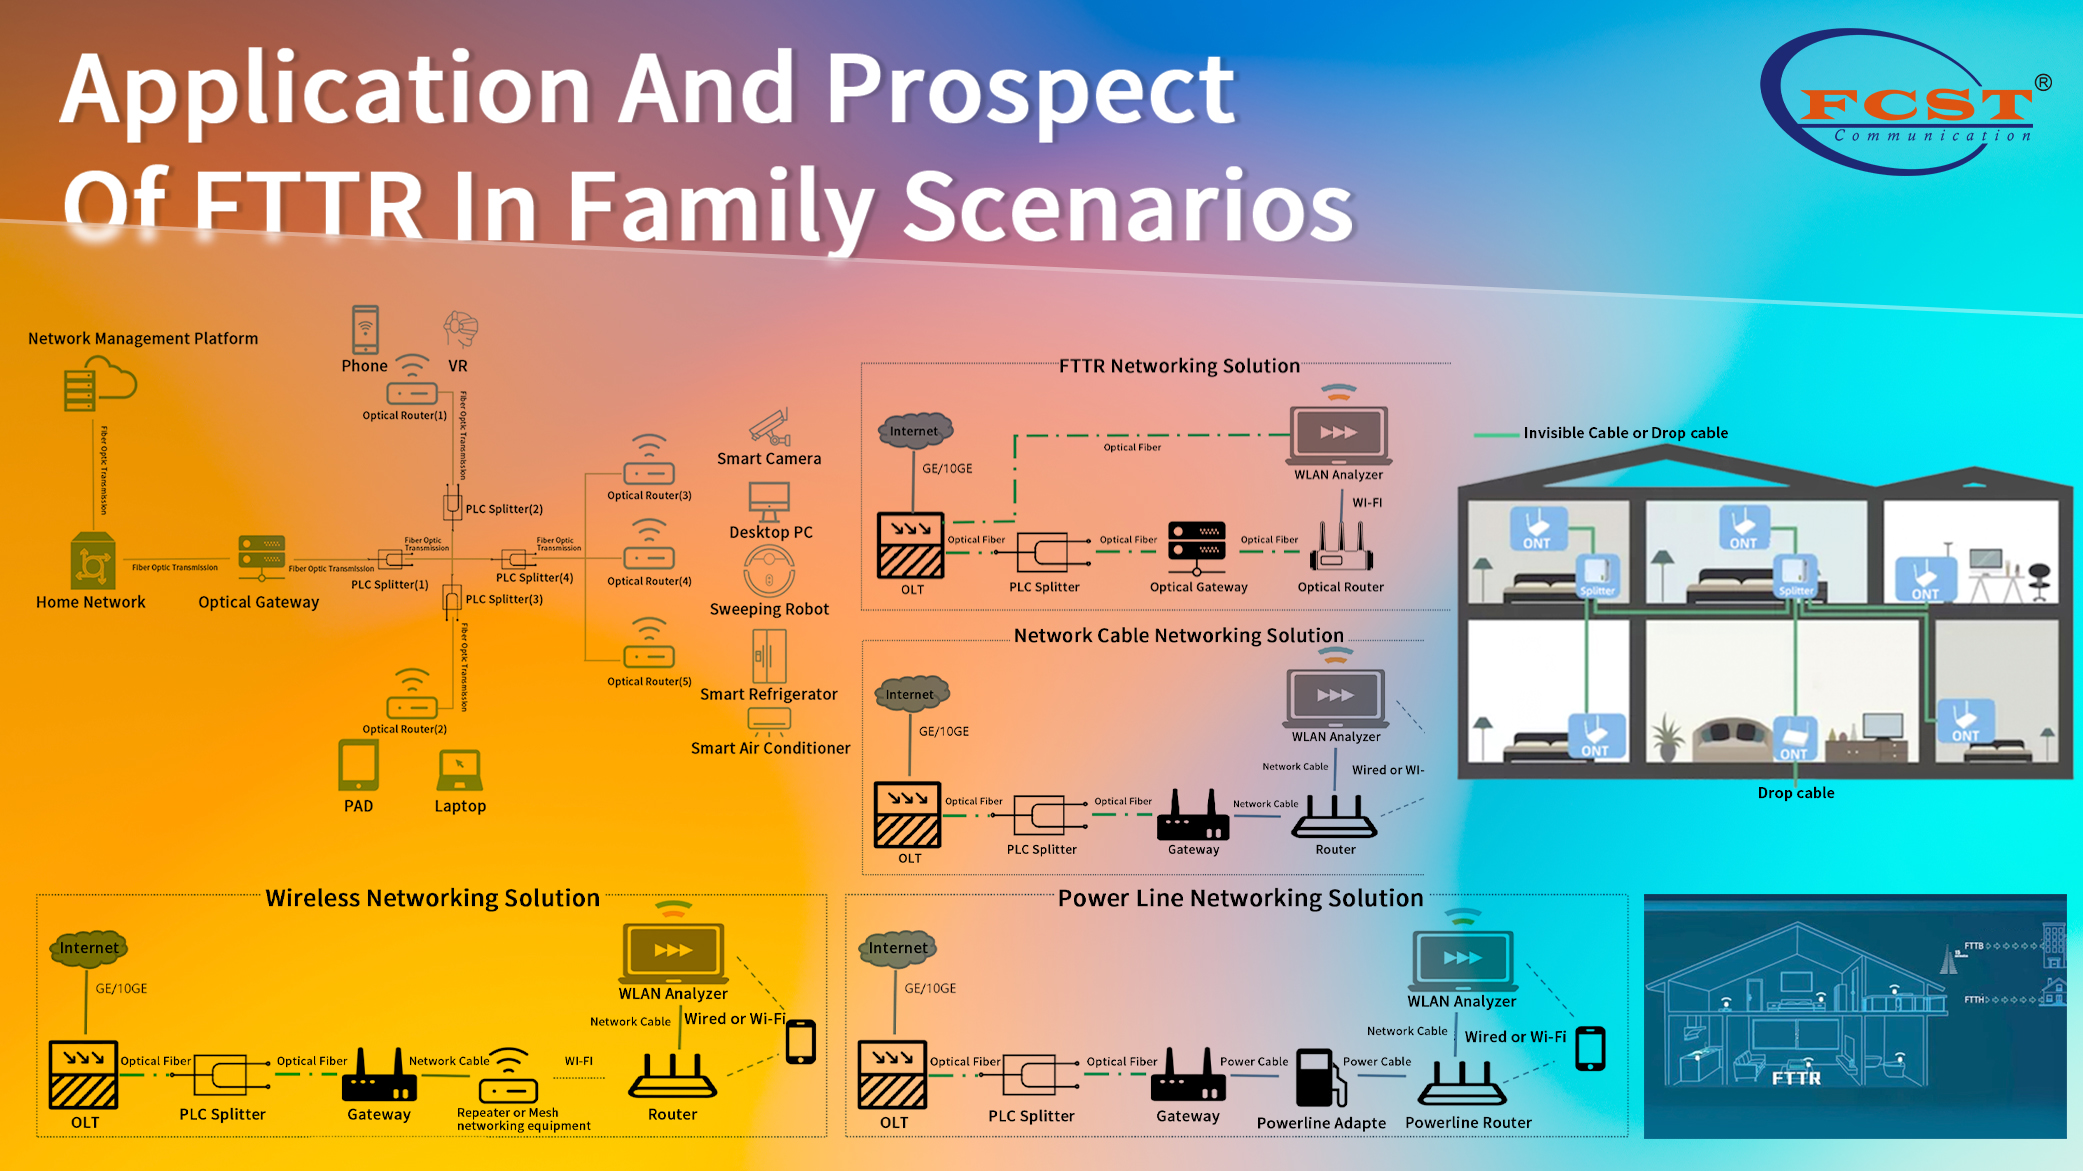 Application And Prospect Of FTTR In Family Scenarios